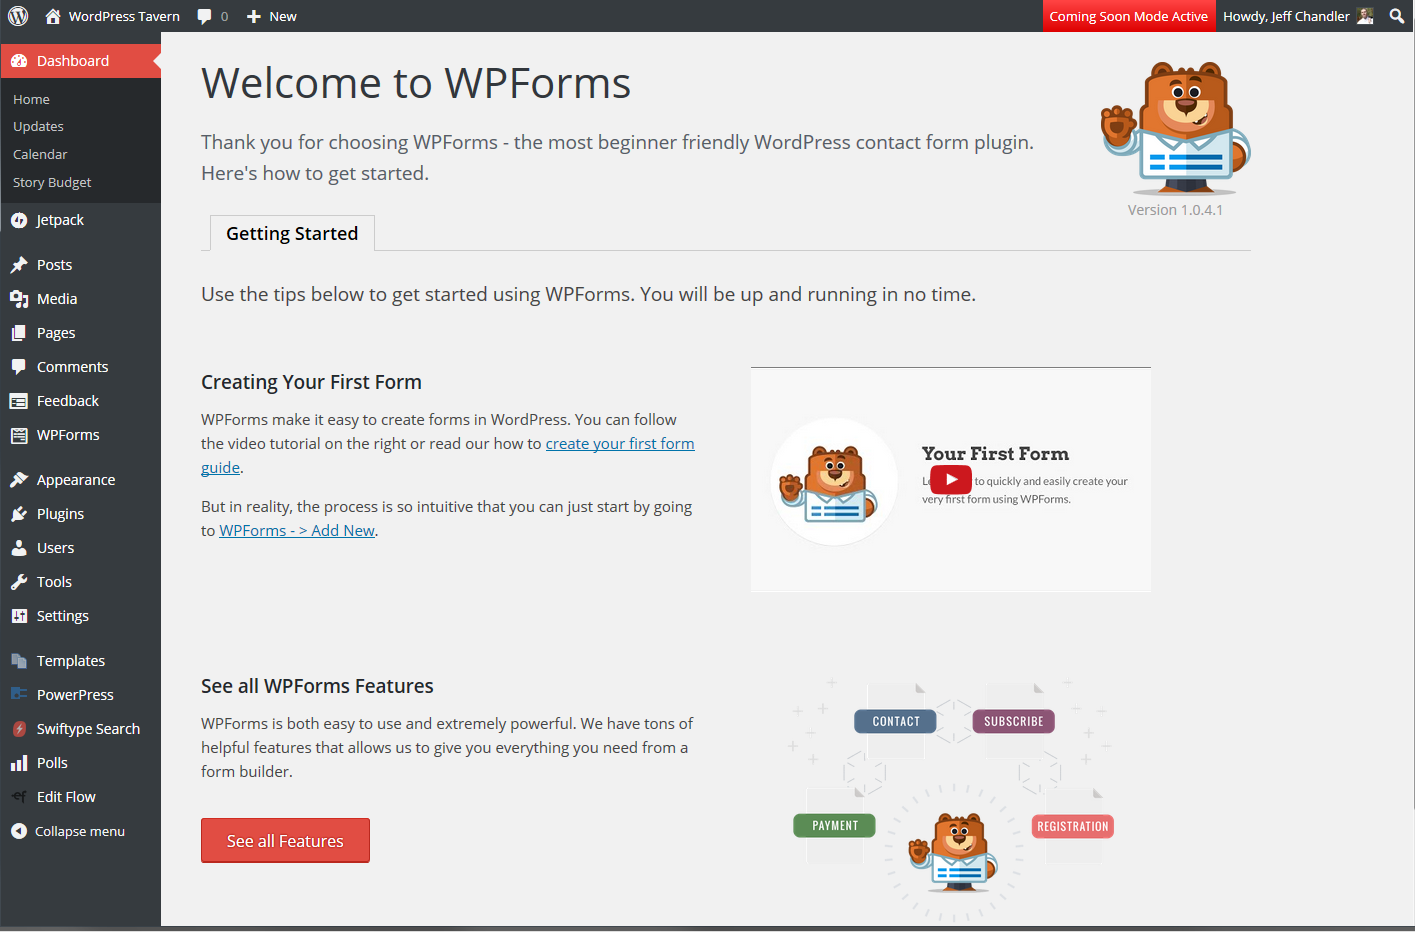 WP Forms Introduction Screen